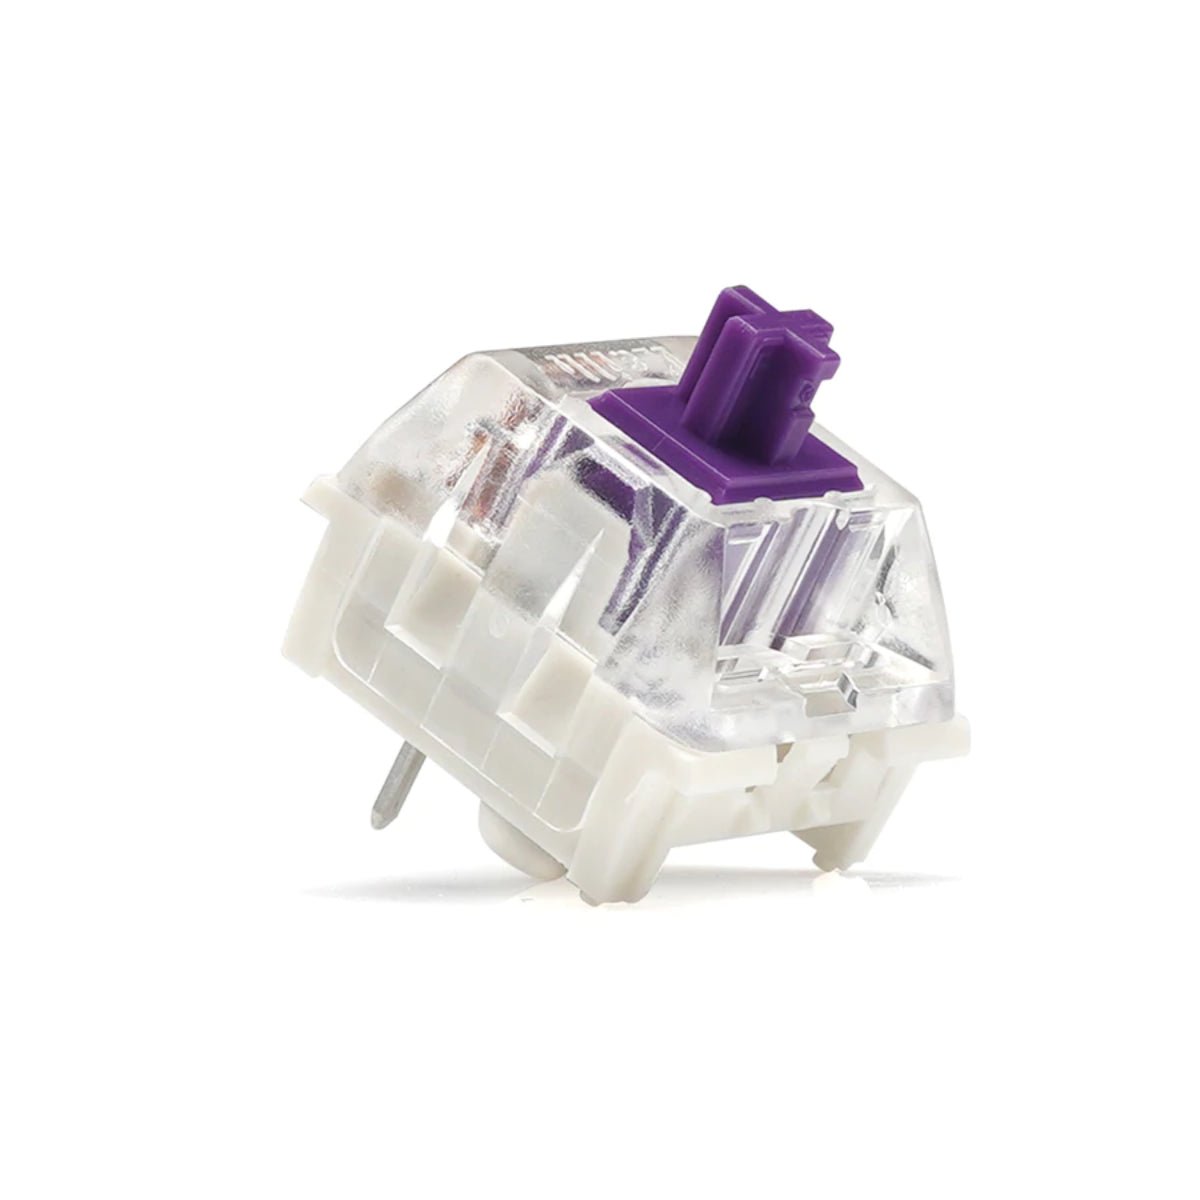 KBD Fans Kailh Pro Tactile Switches - Purple - Store 974 | ستور ٩٧٤